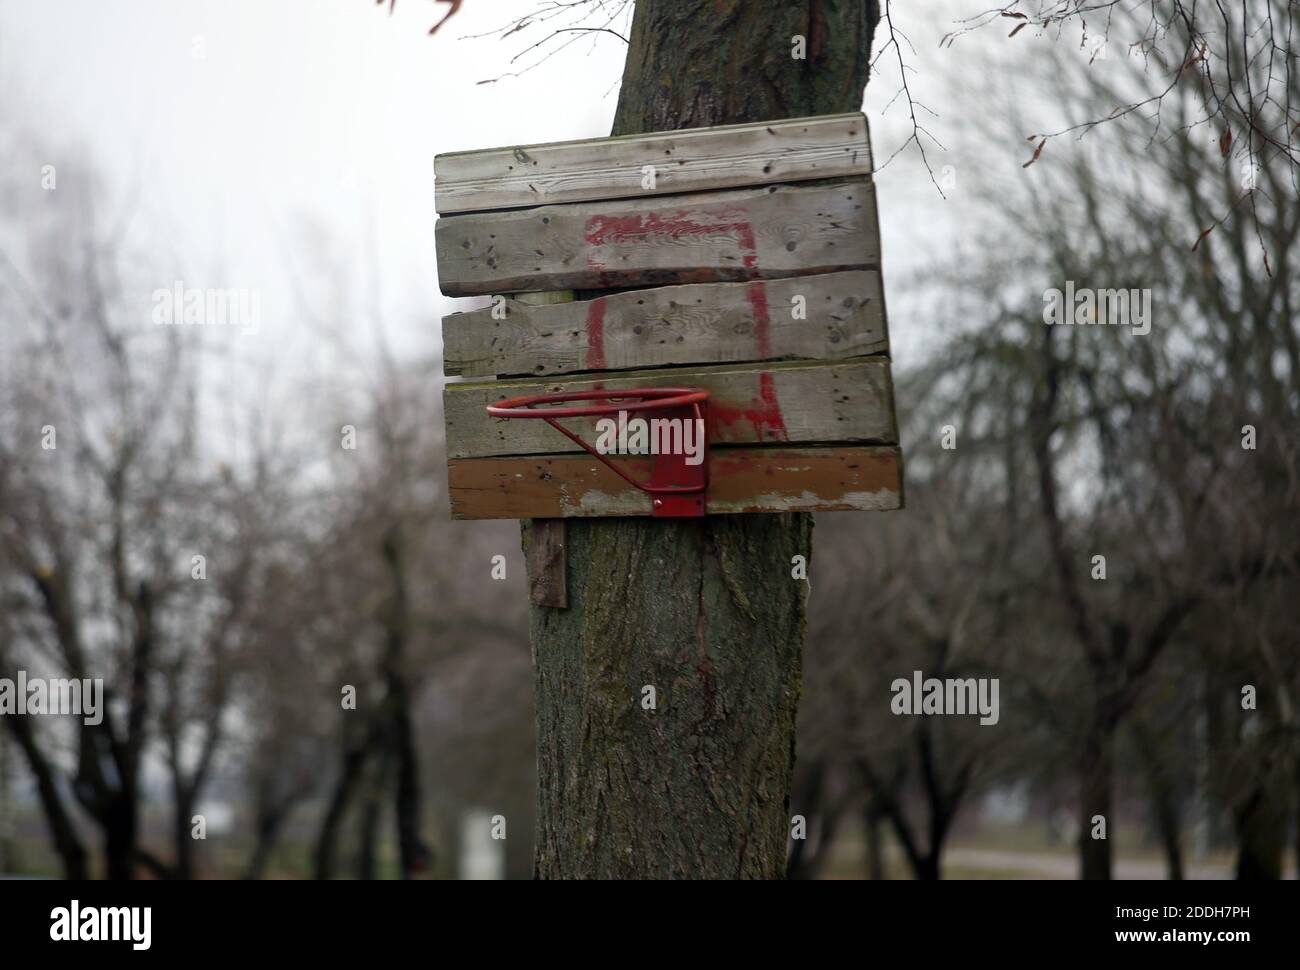 Old and rusty basketball hoop with tangled net, on an old wooden backboard. Lithuania Stock Photo